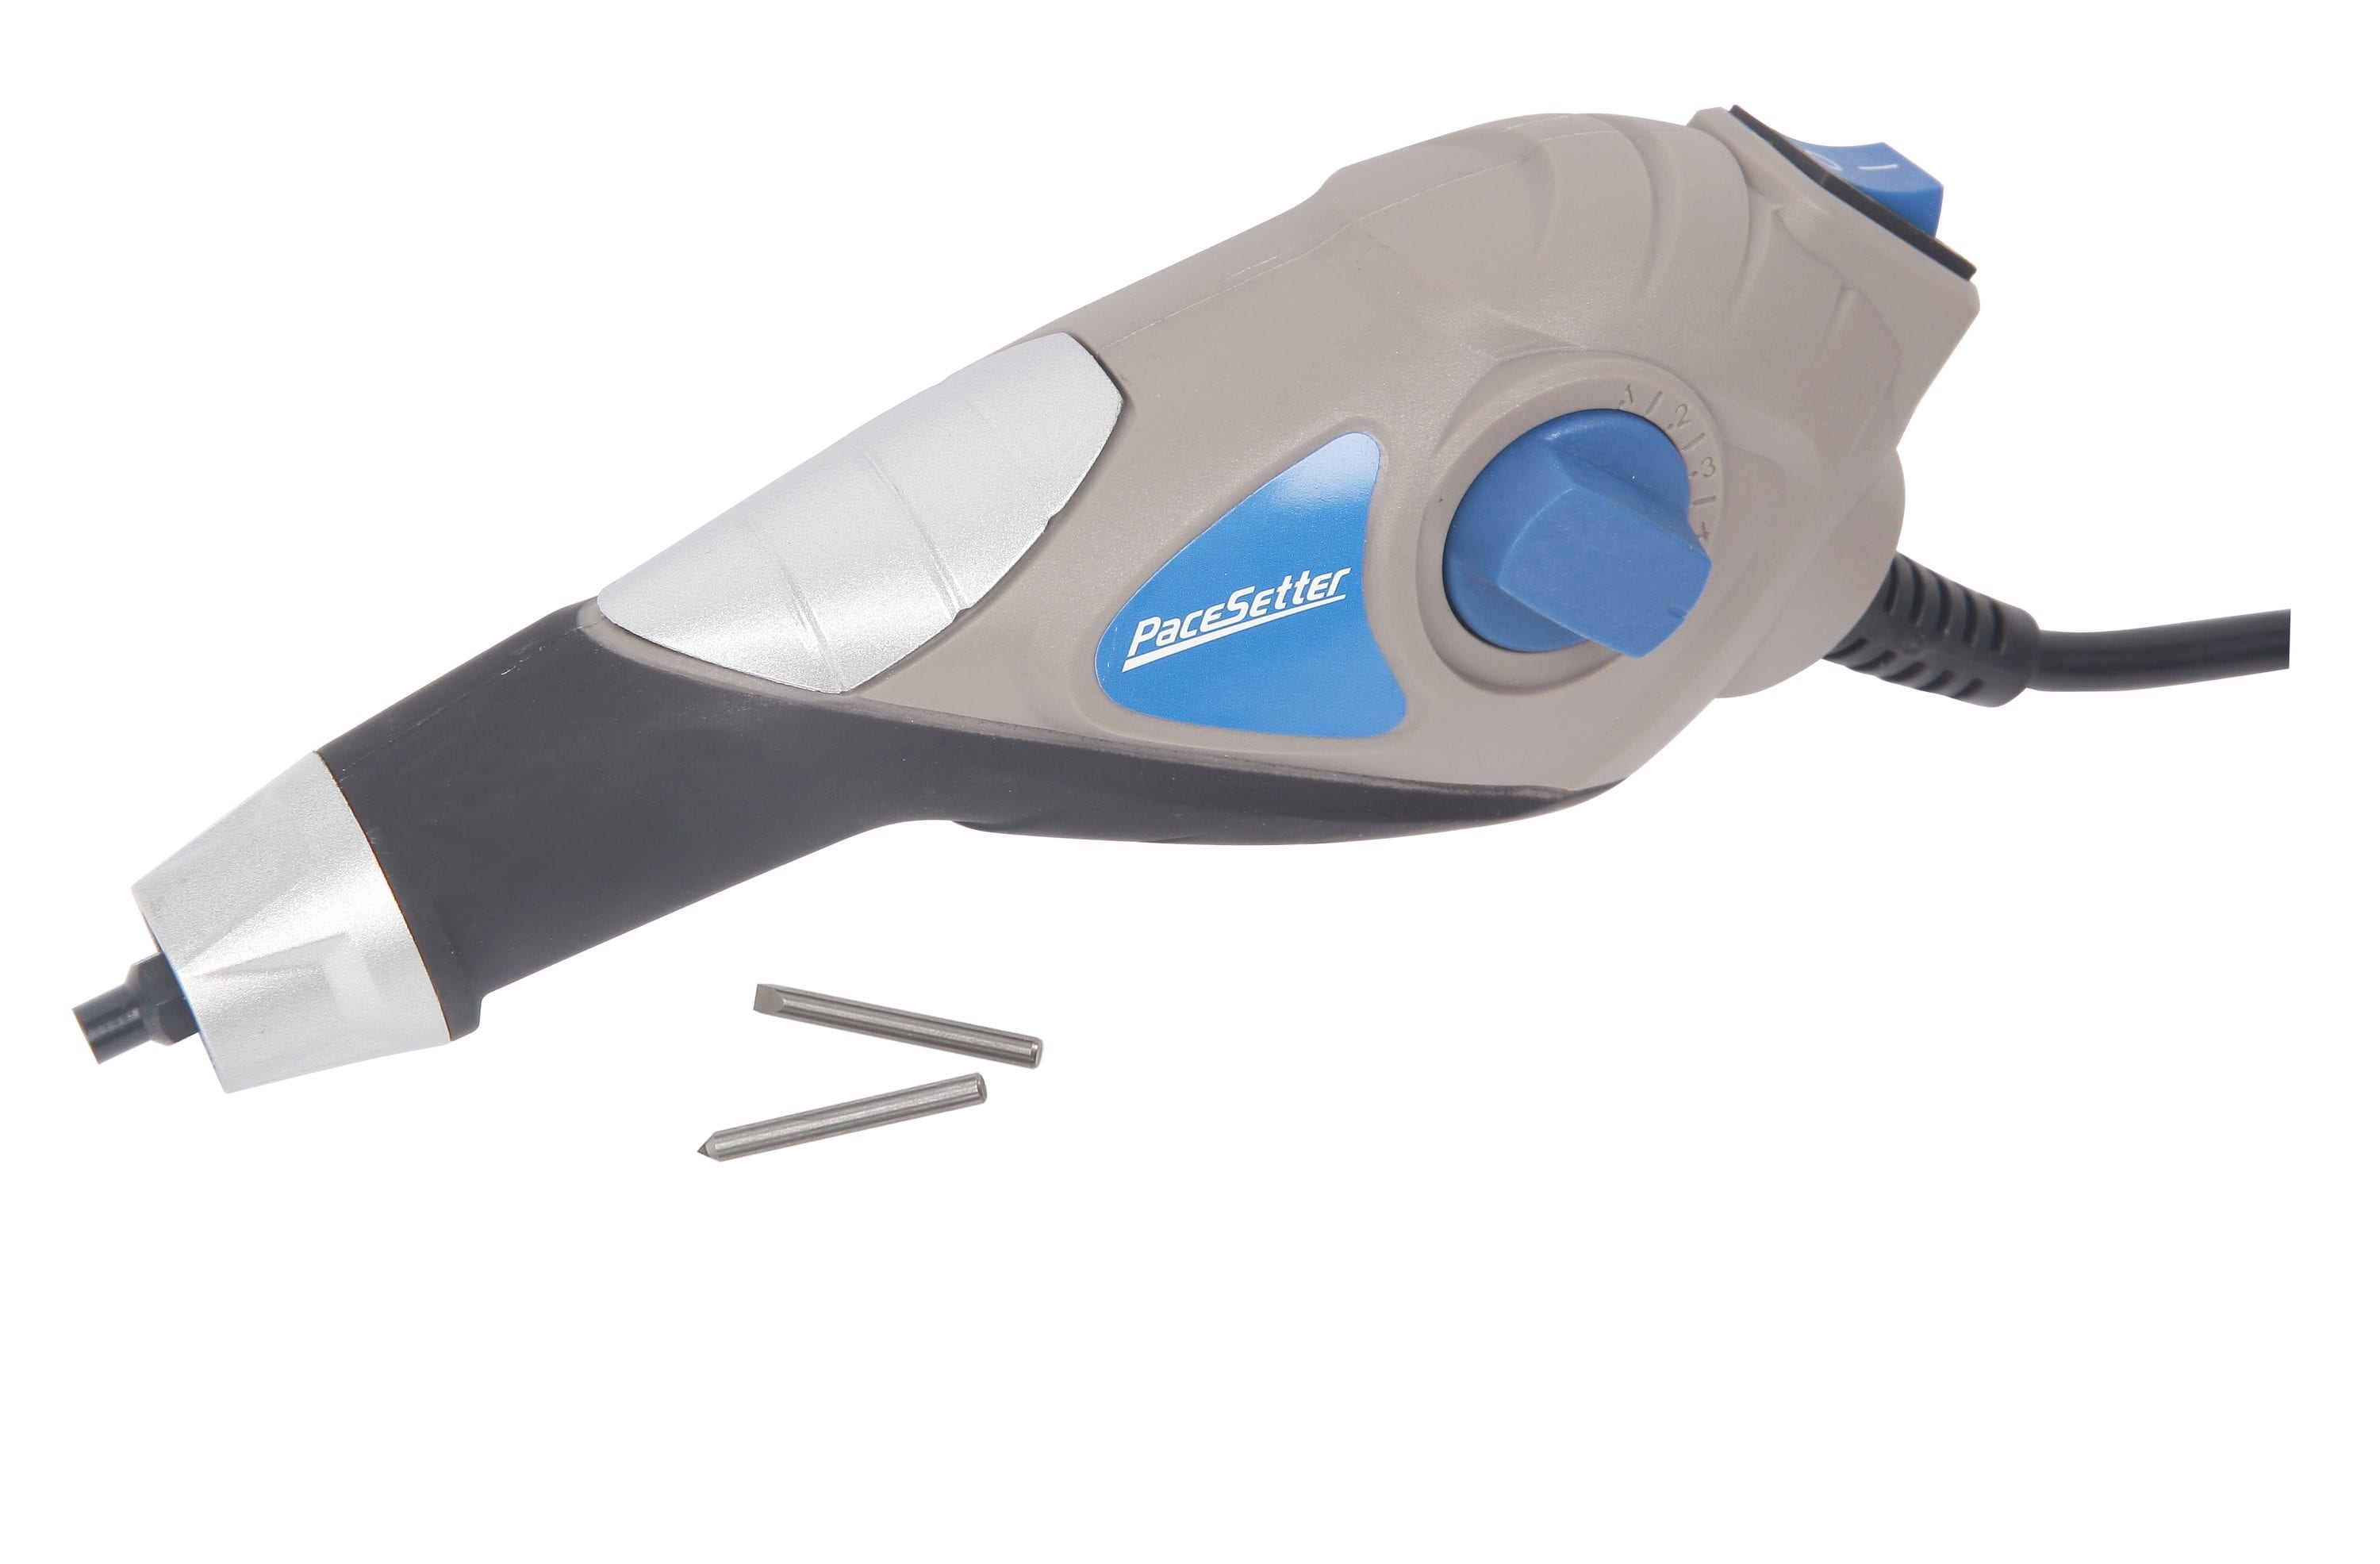 EDIC Revolution Tile and Grout Cleaning Tool #REV1200